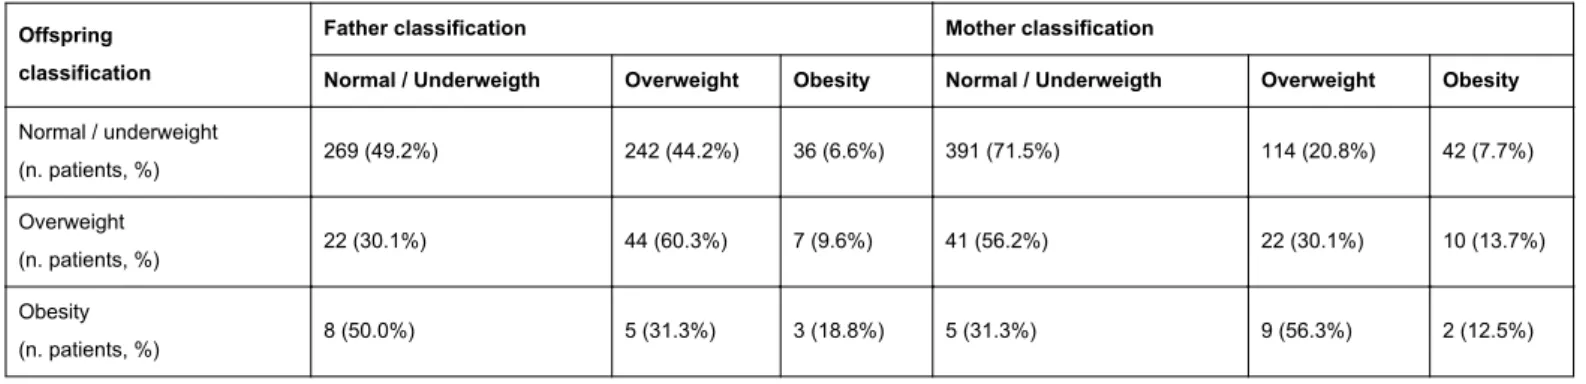 Table 2: Distribution of normal / underweight, overweight, and obesity in the offspring on the basis of mother’s and father’s weight status